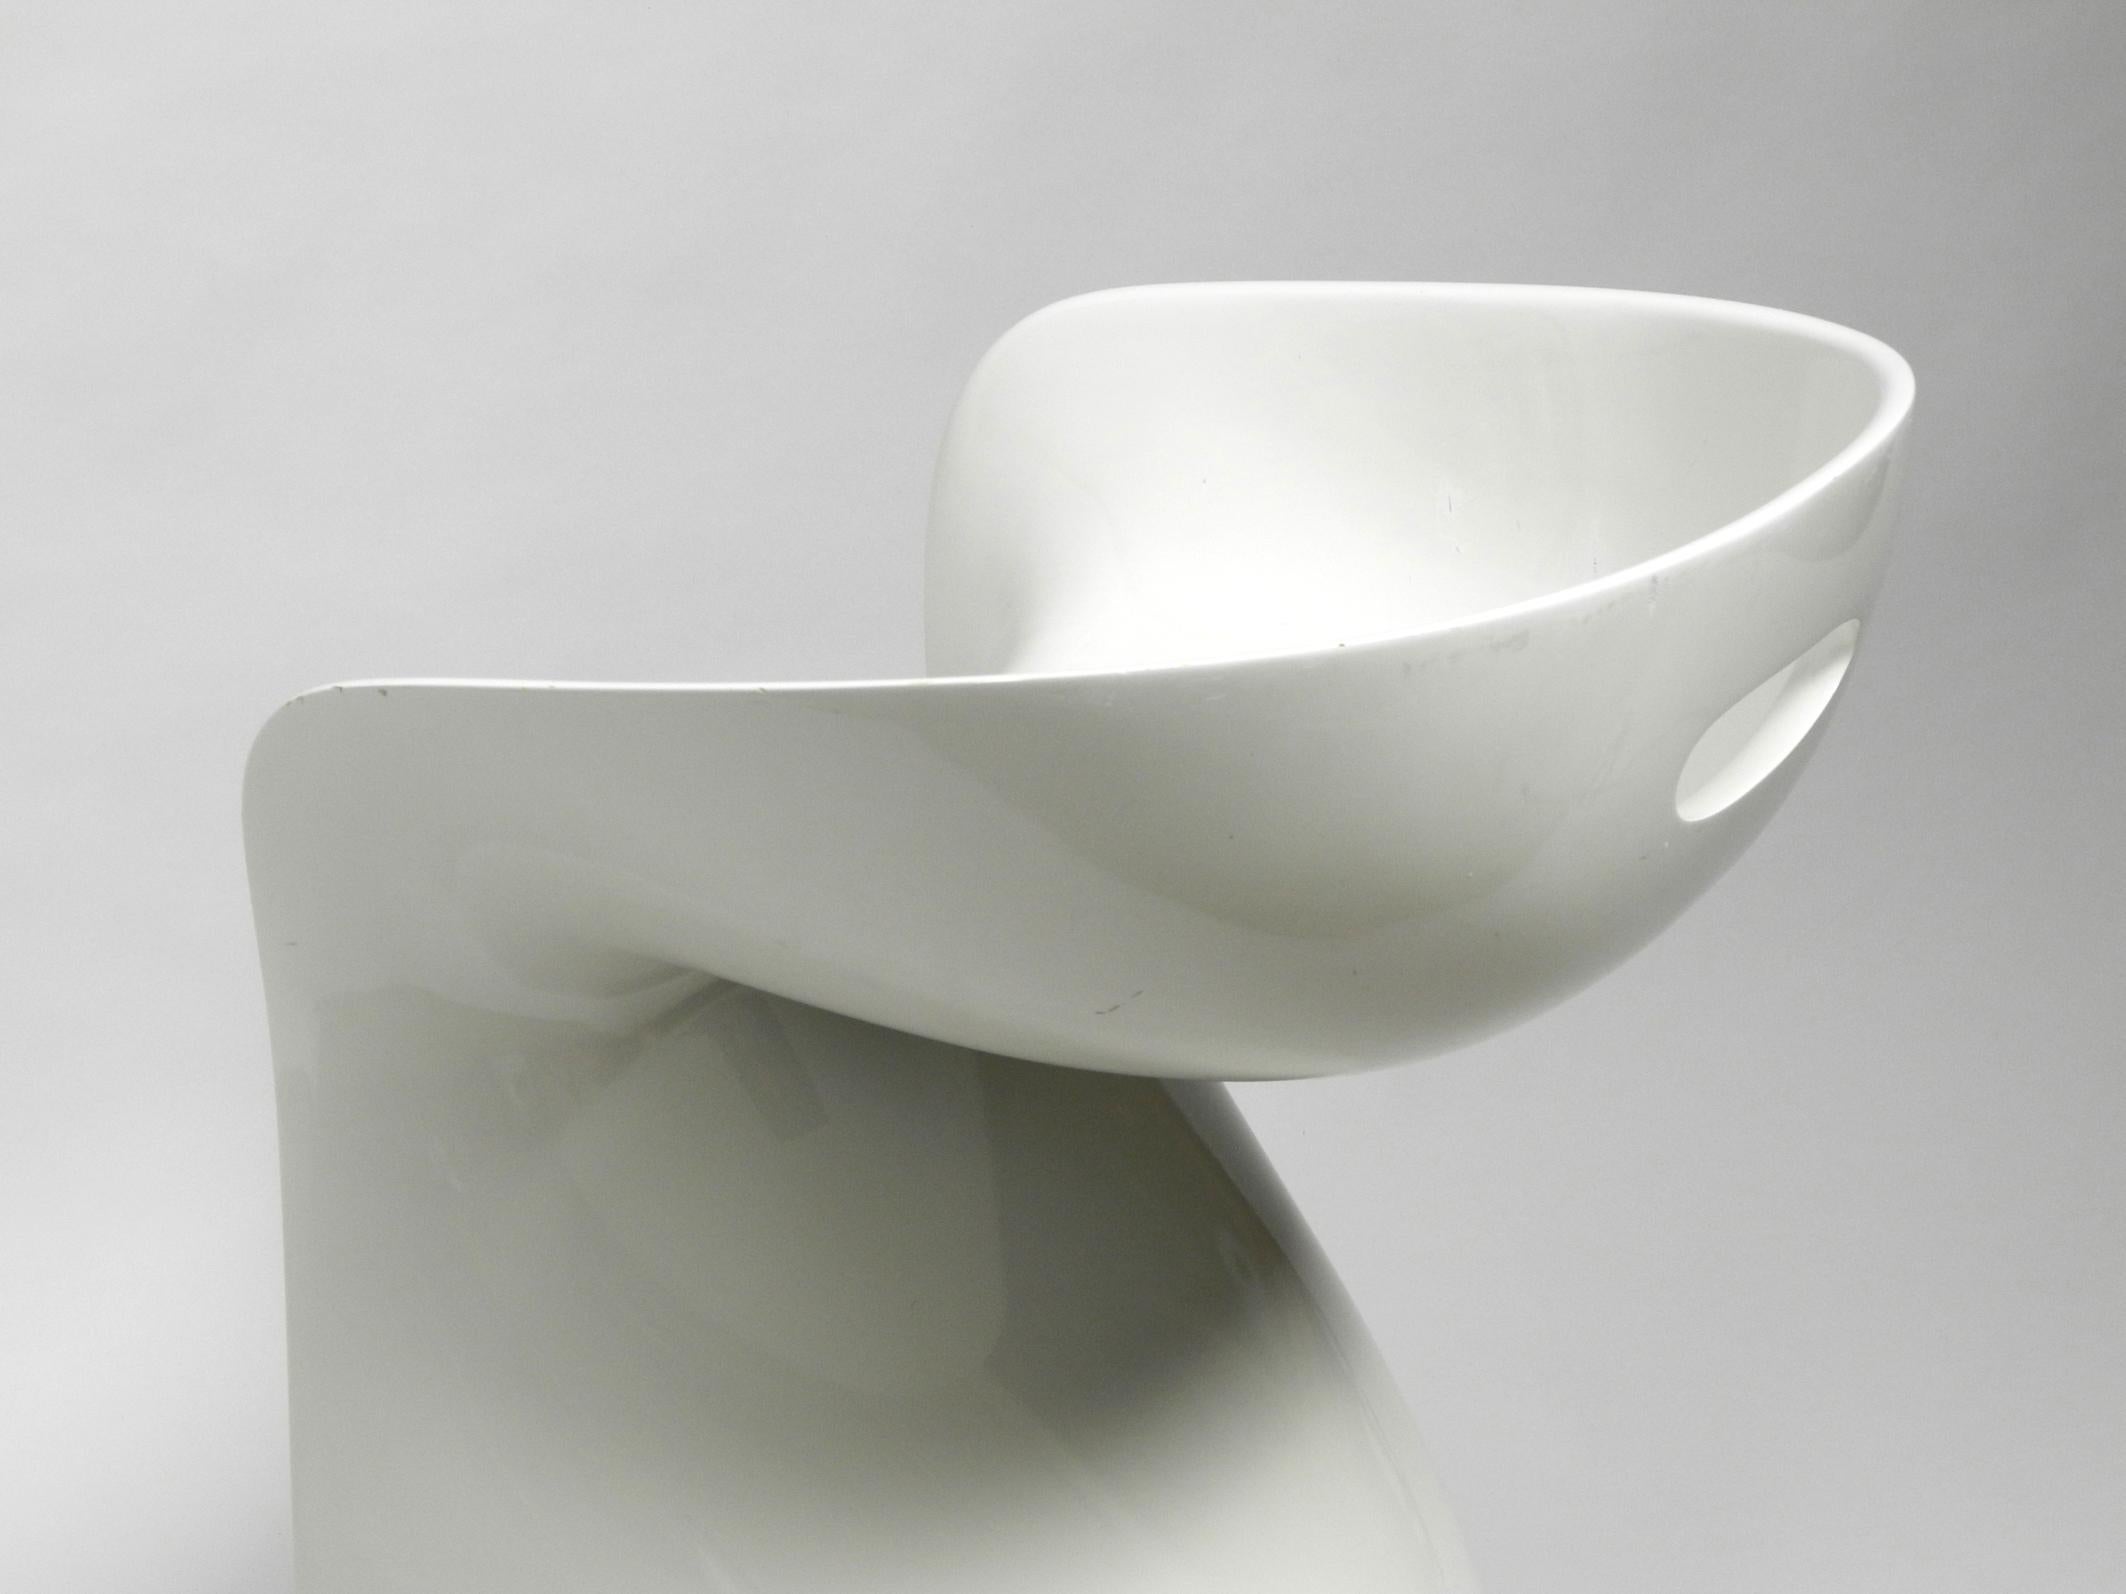 Late 20th Century Rare White Stool by Winfried Staeb from the 1970s for Form + Life Collection